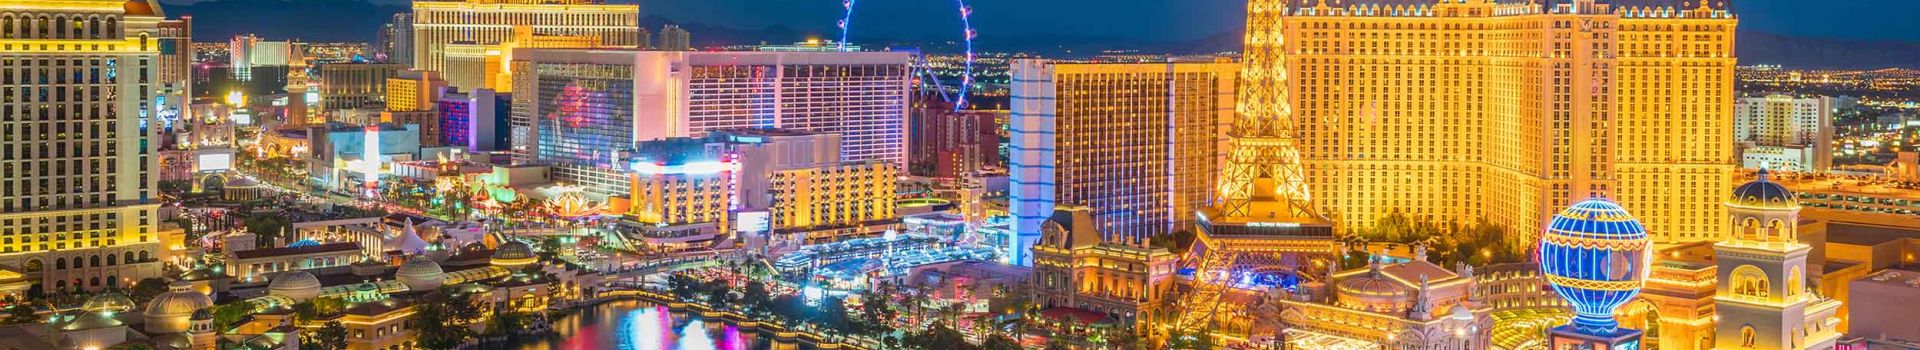 Cheap holidays from Shannon to Las Vegas with Cassidy Travel